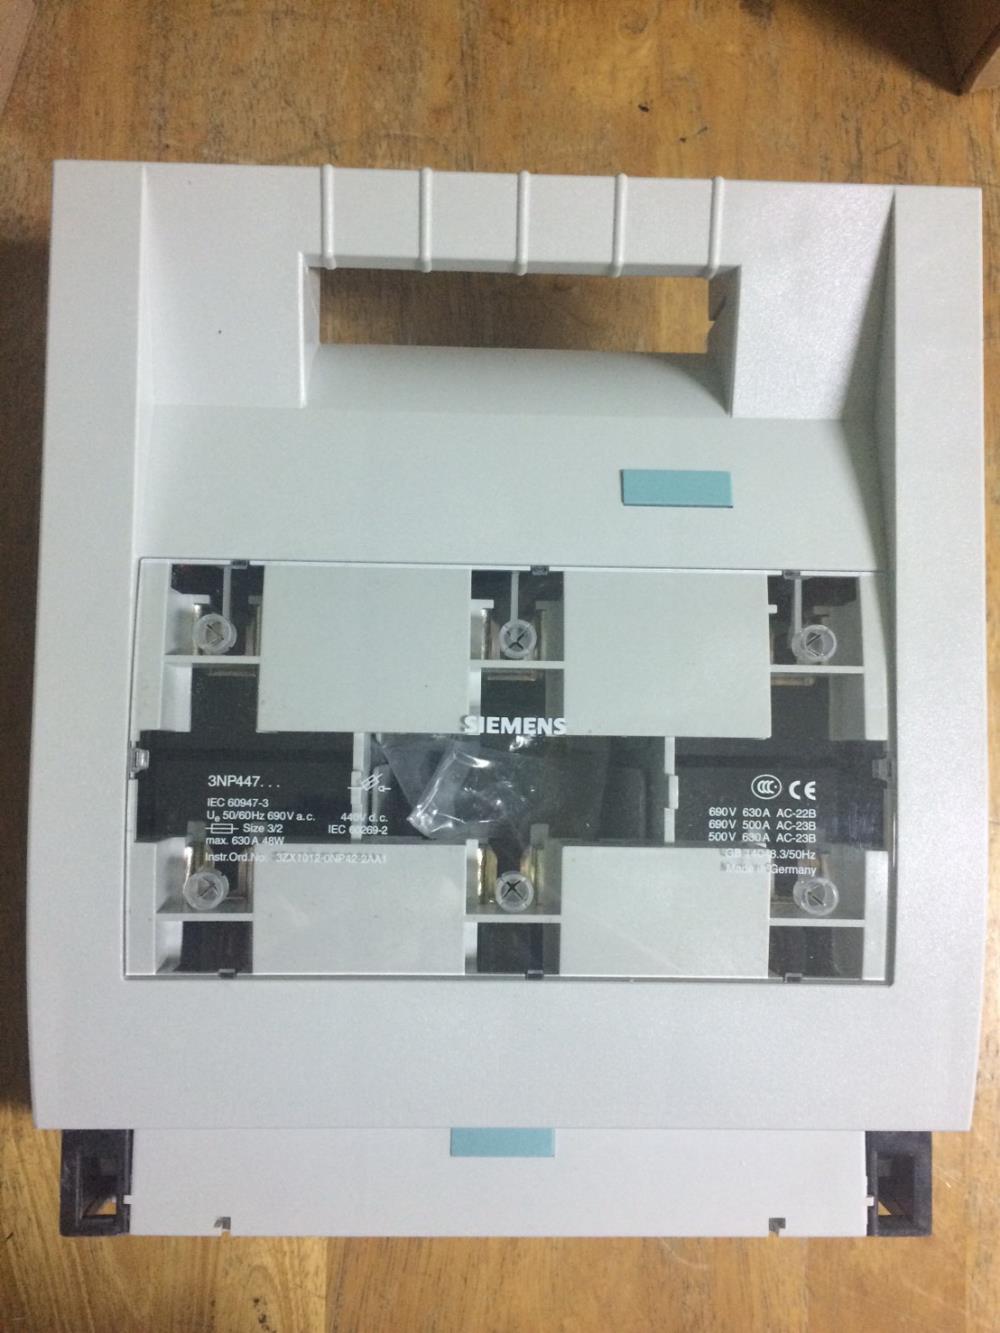 "Siemens"Fuse Switch Disconnector, 3NP4470-0CA01#"Siemens"Fuse Switch Disconnector, 3NP4470-0CA01,"Siemens"Fuse Switch Disconnector, 3NP4470-0CA01#"Siemens"Fuse Switch Disconnector, 3NP4470-0CA01,"Siemens"Fuse Switch Disconnector, 3NP4470-0CA01#"Siemens"Fuse Switch Disconnector, 3NP4470-0CA01,Instruments and Controls/Switches